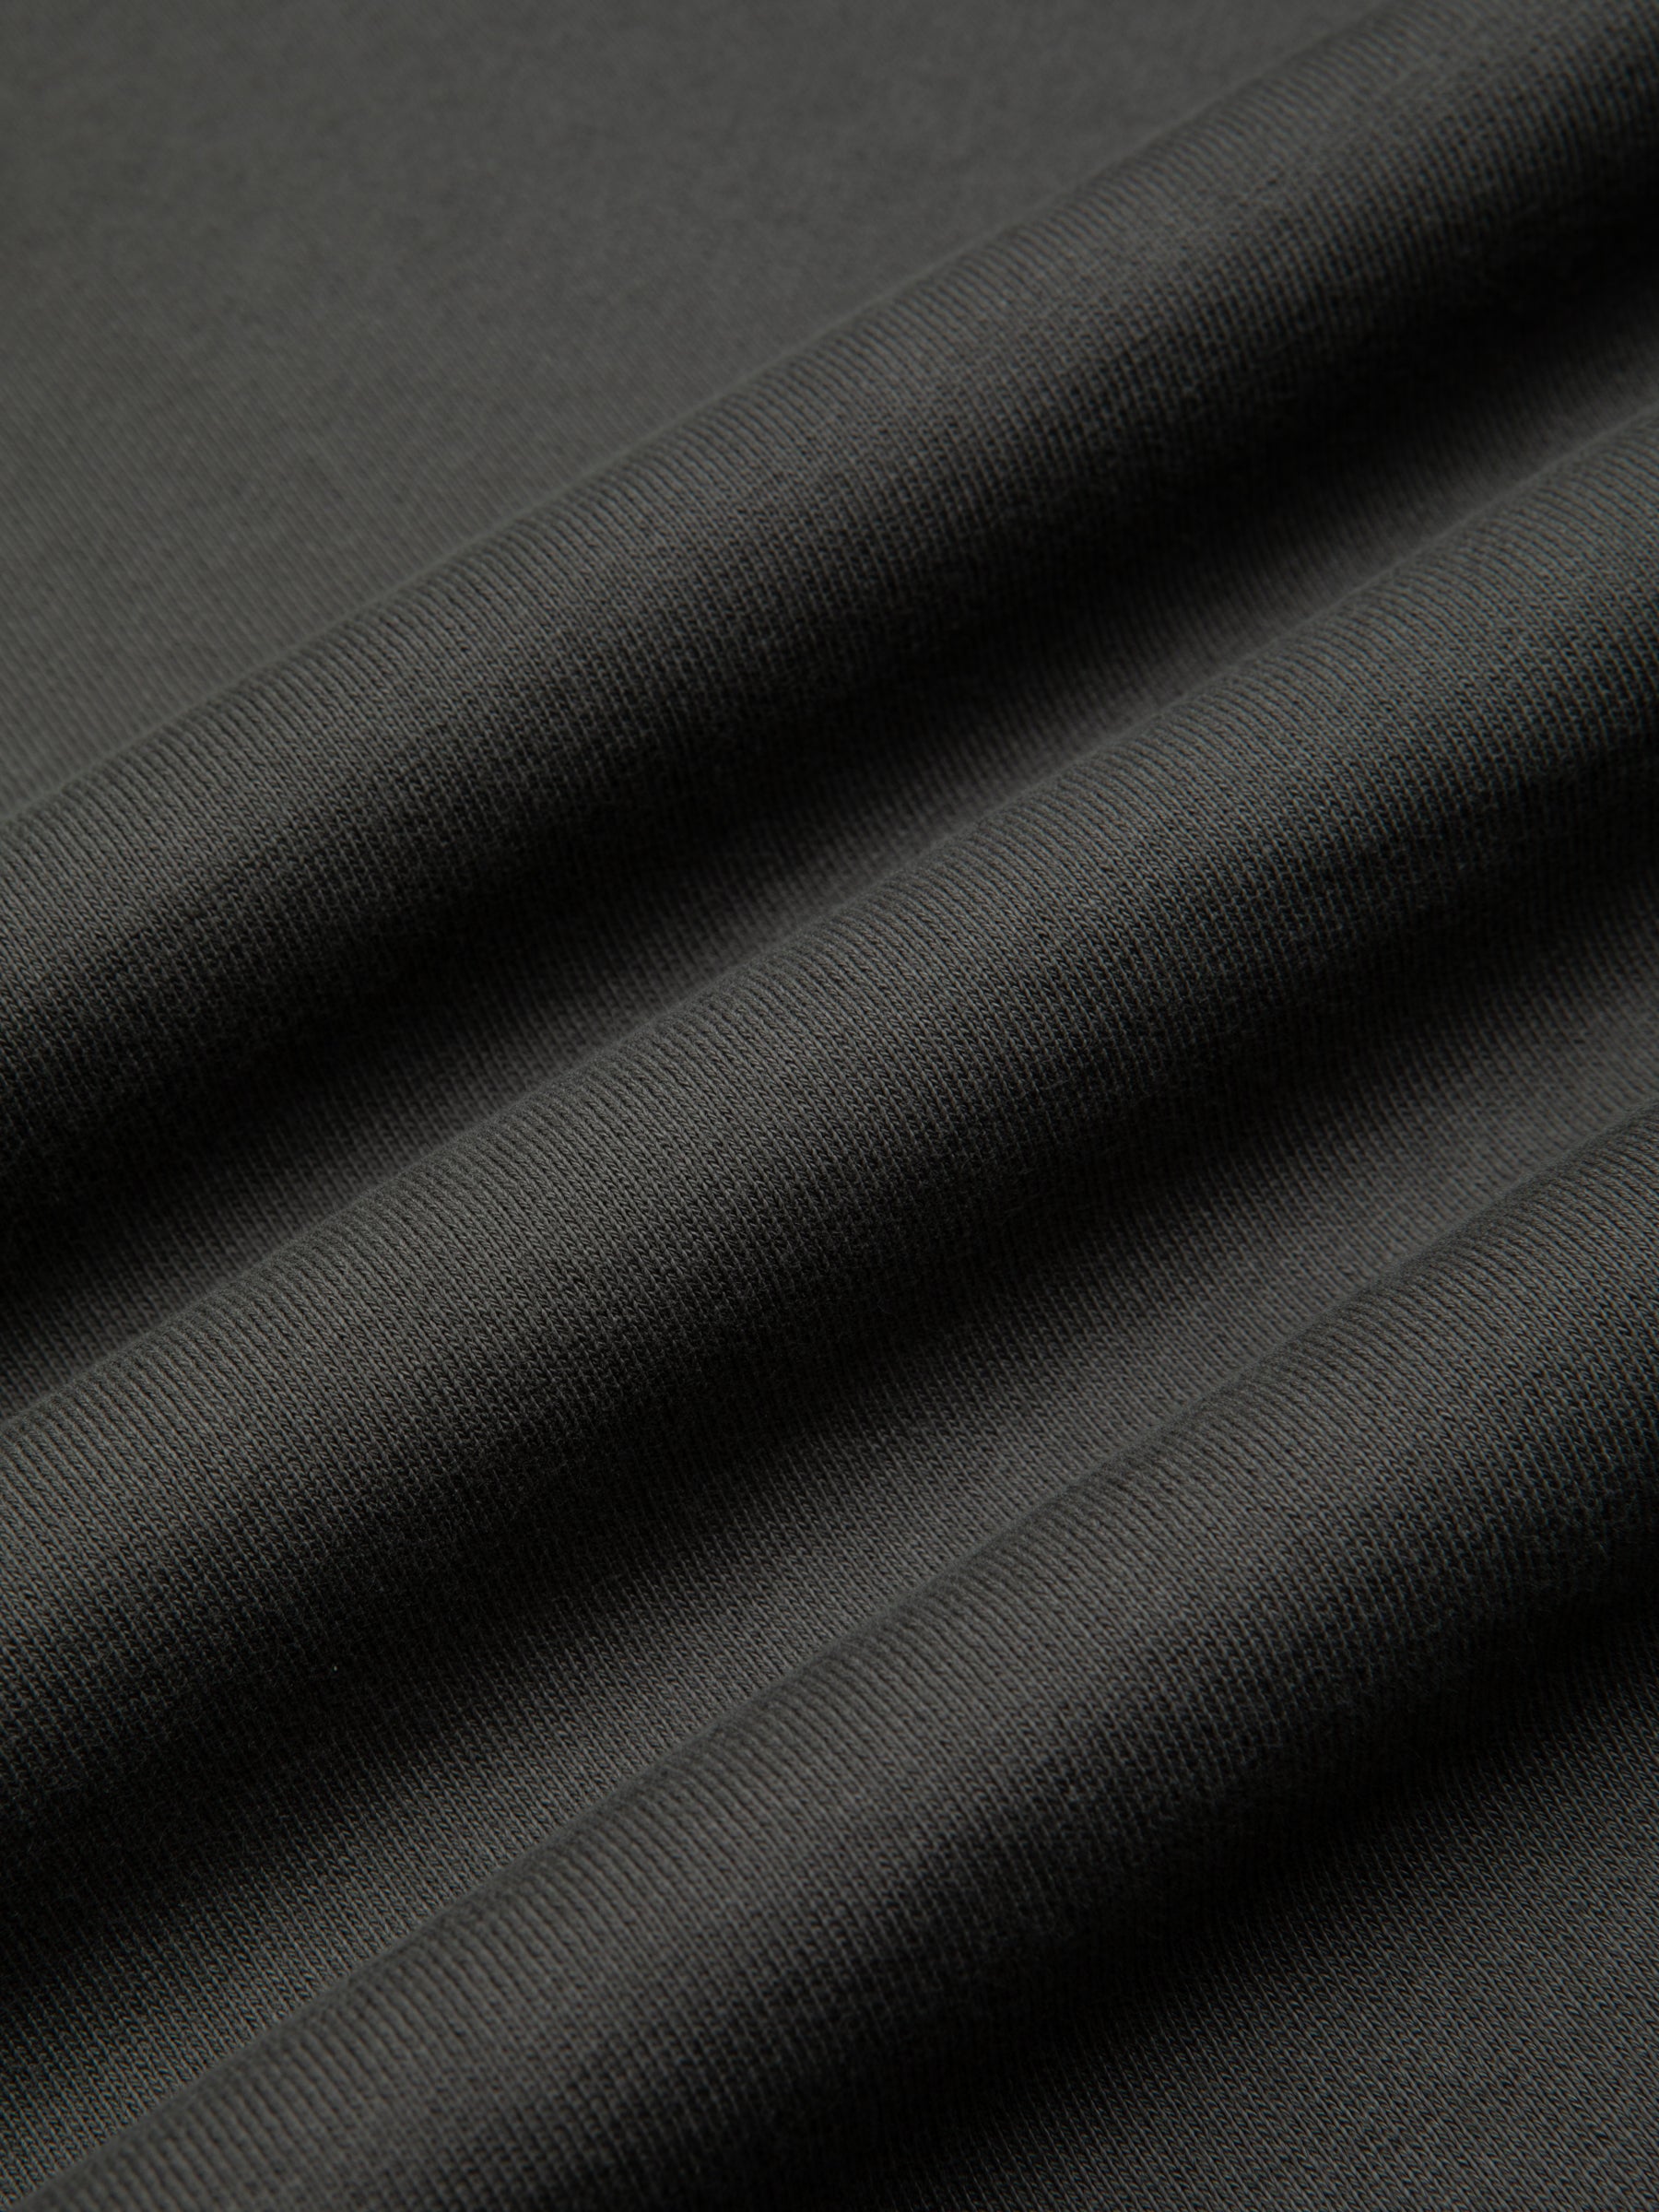 A grey garment dyed material used to make sweatshirts by menswear brand KESTIN.